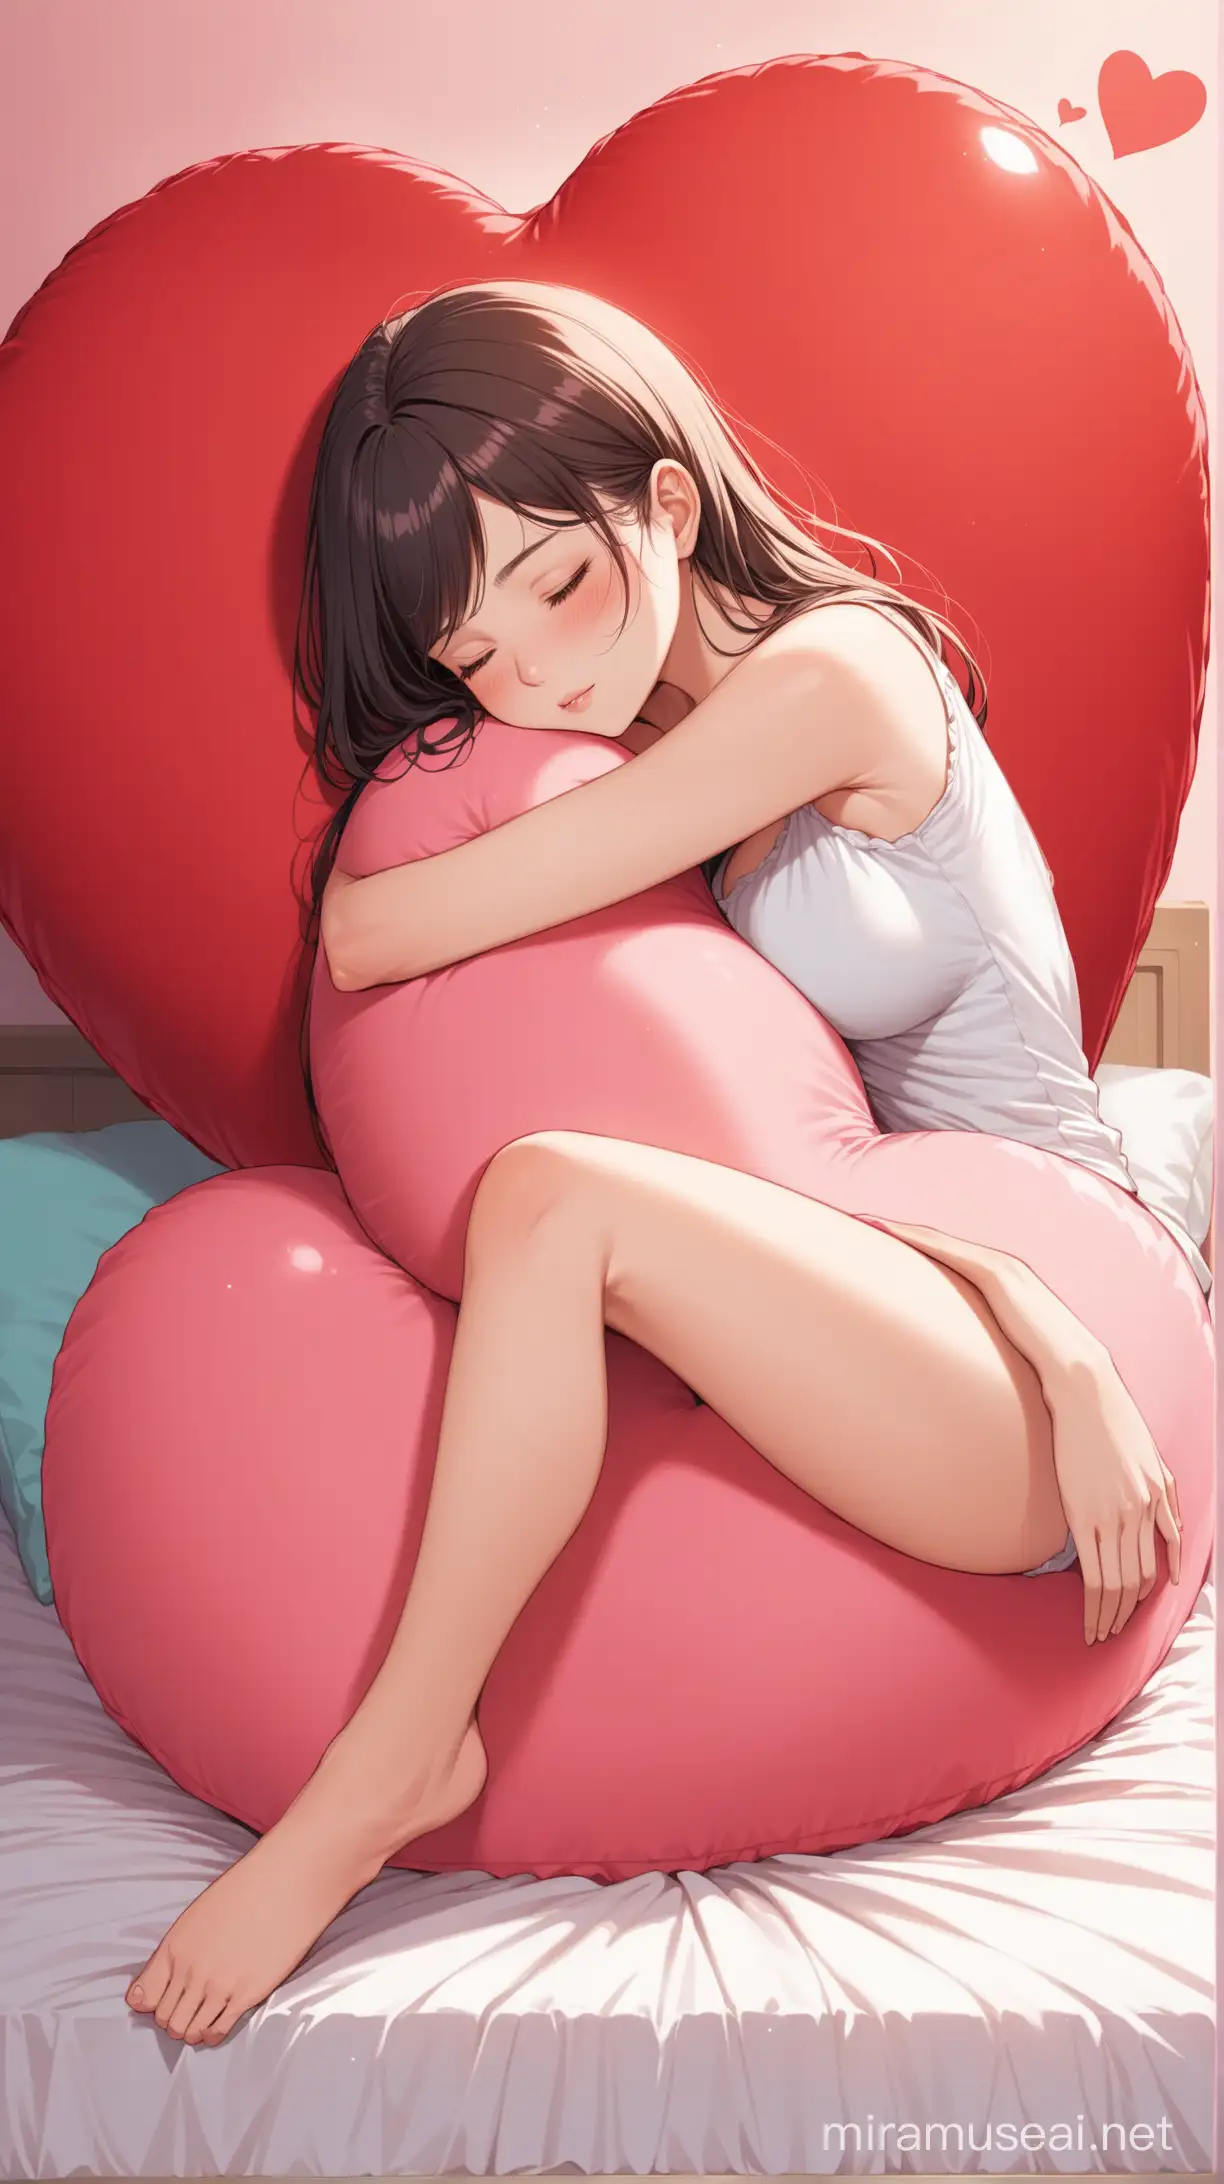 Woman Embracing Giant Heart on Bed